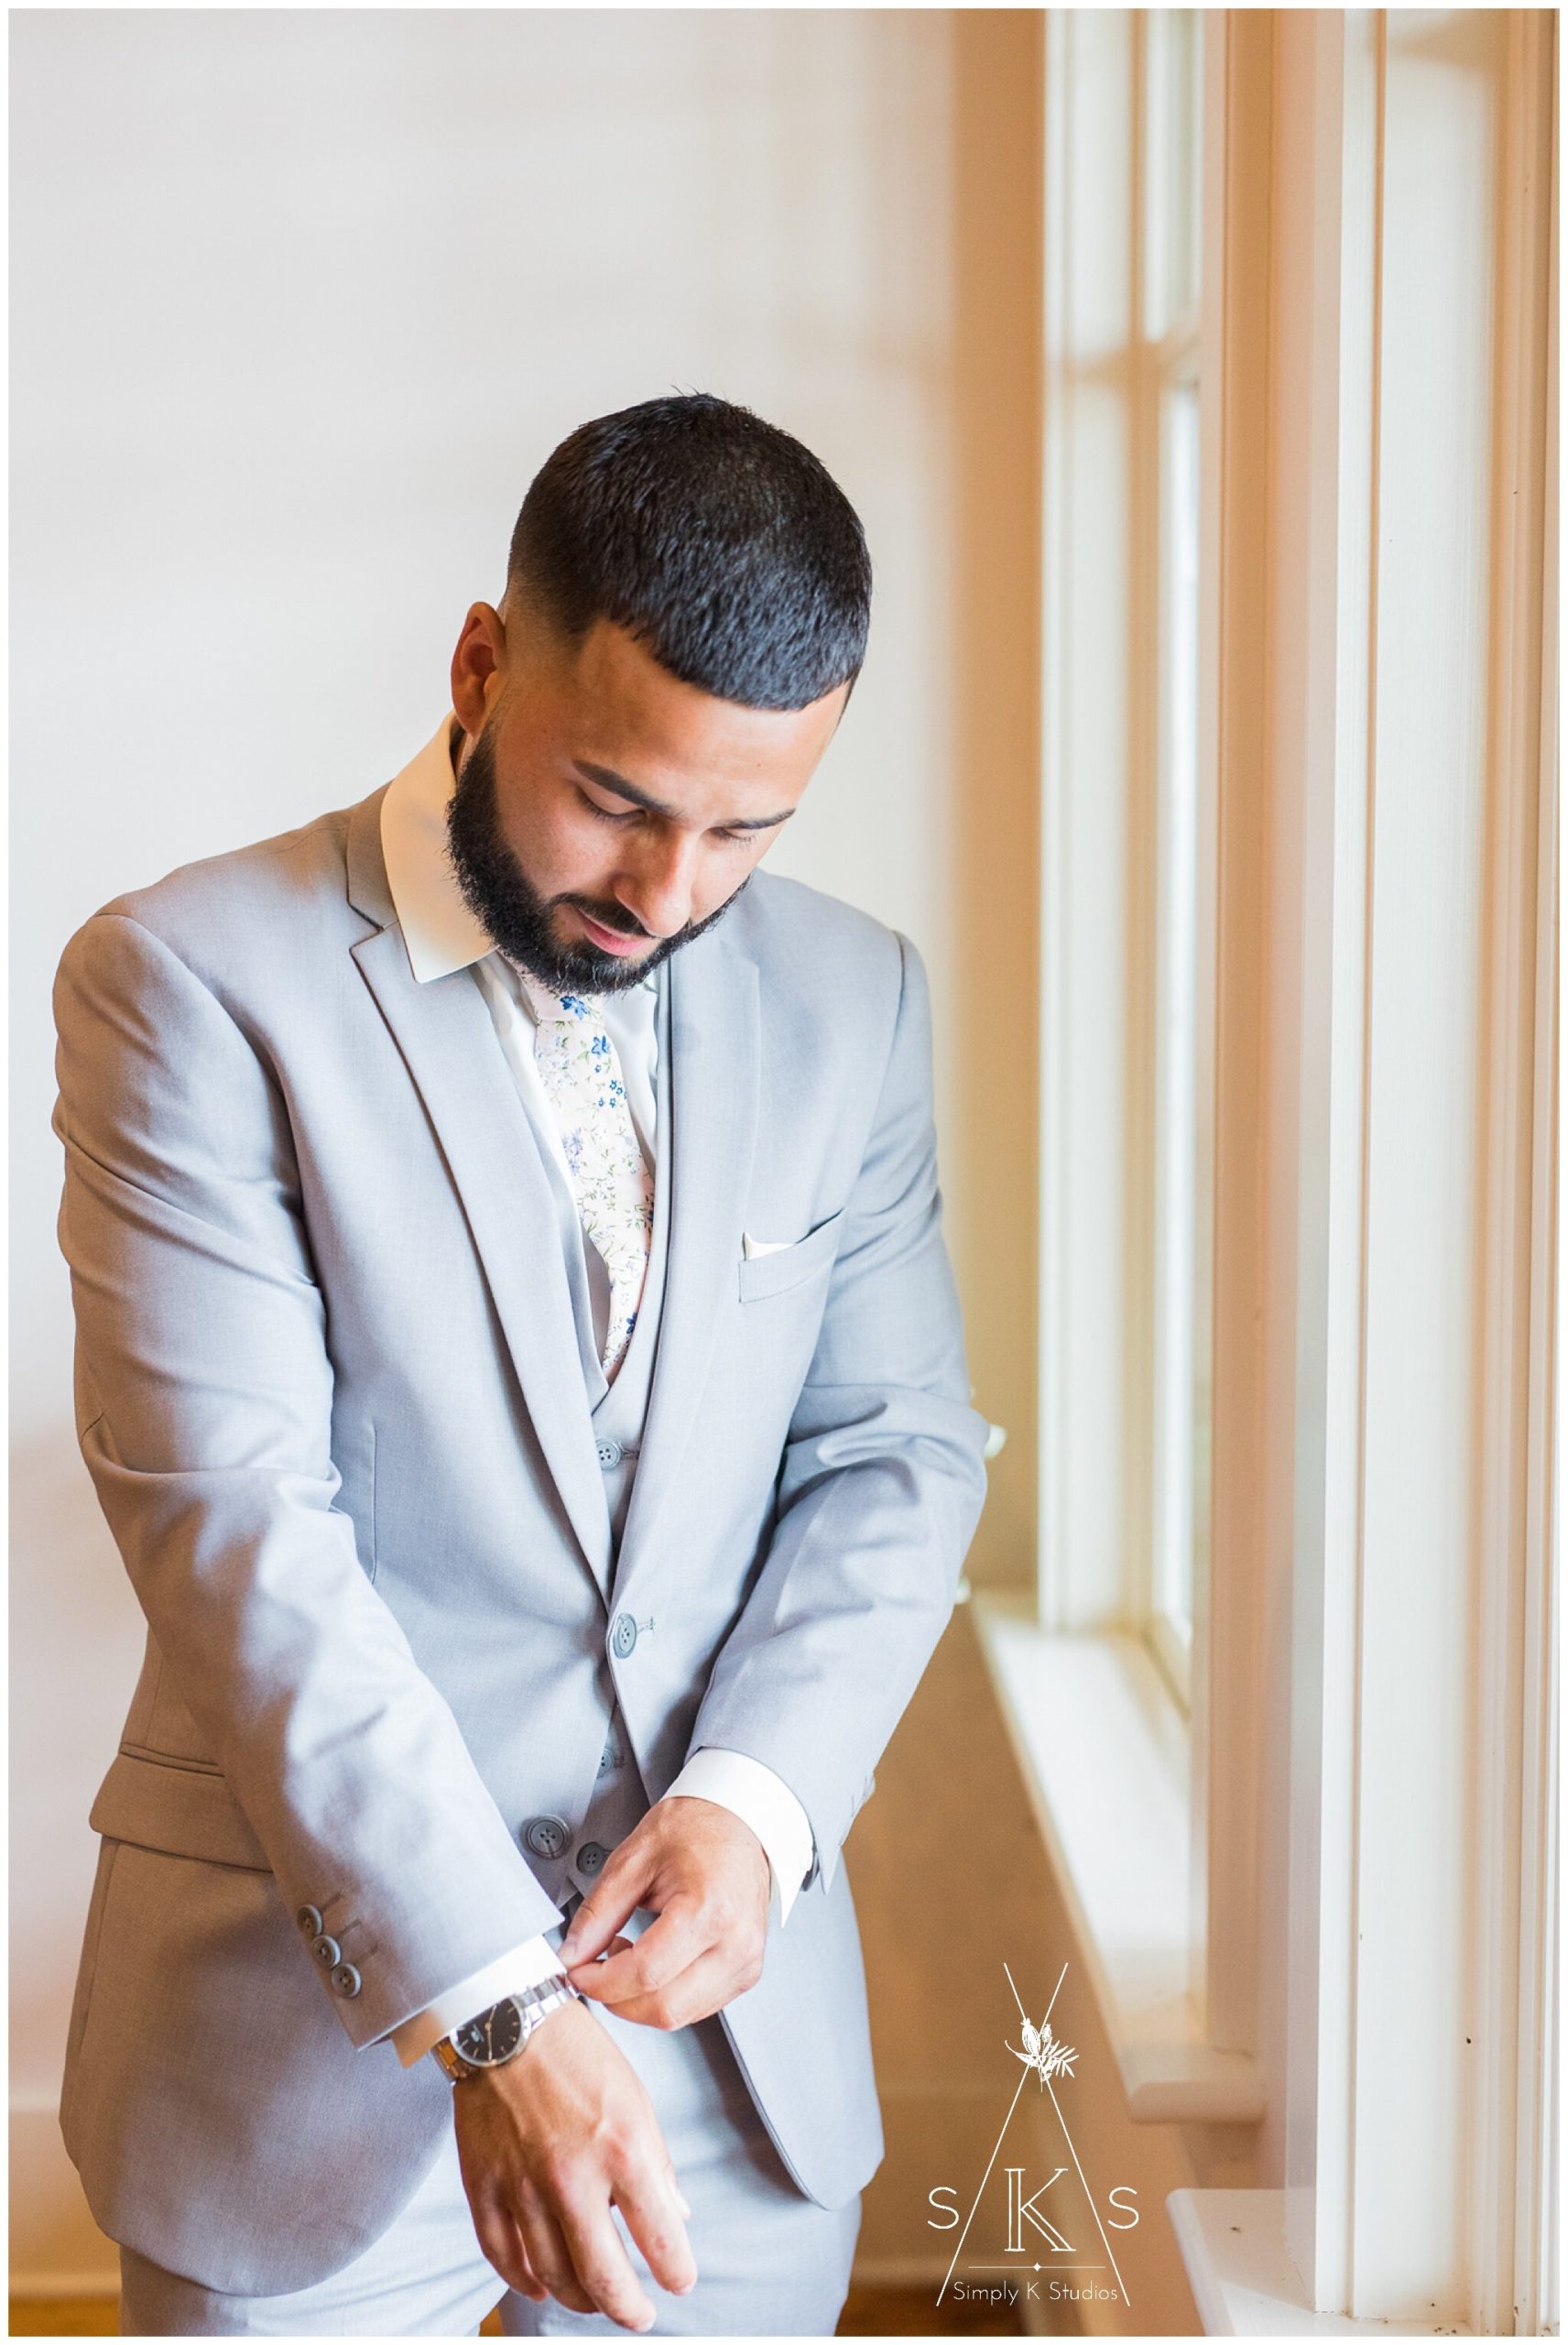 17 Groom in a Gray Suit for a Wedding.jpg